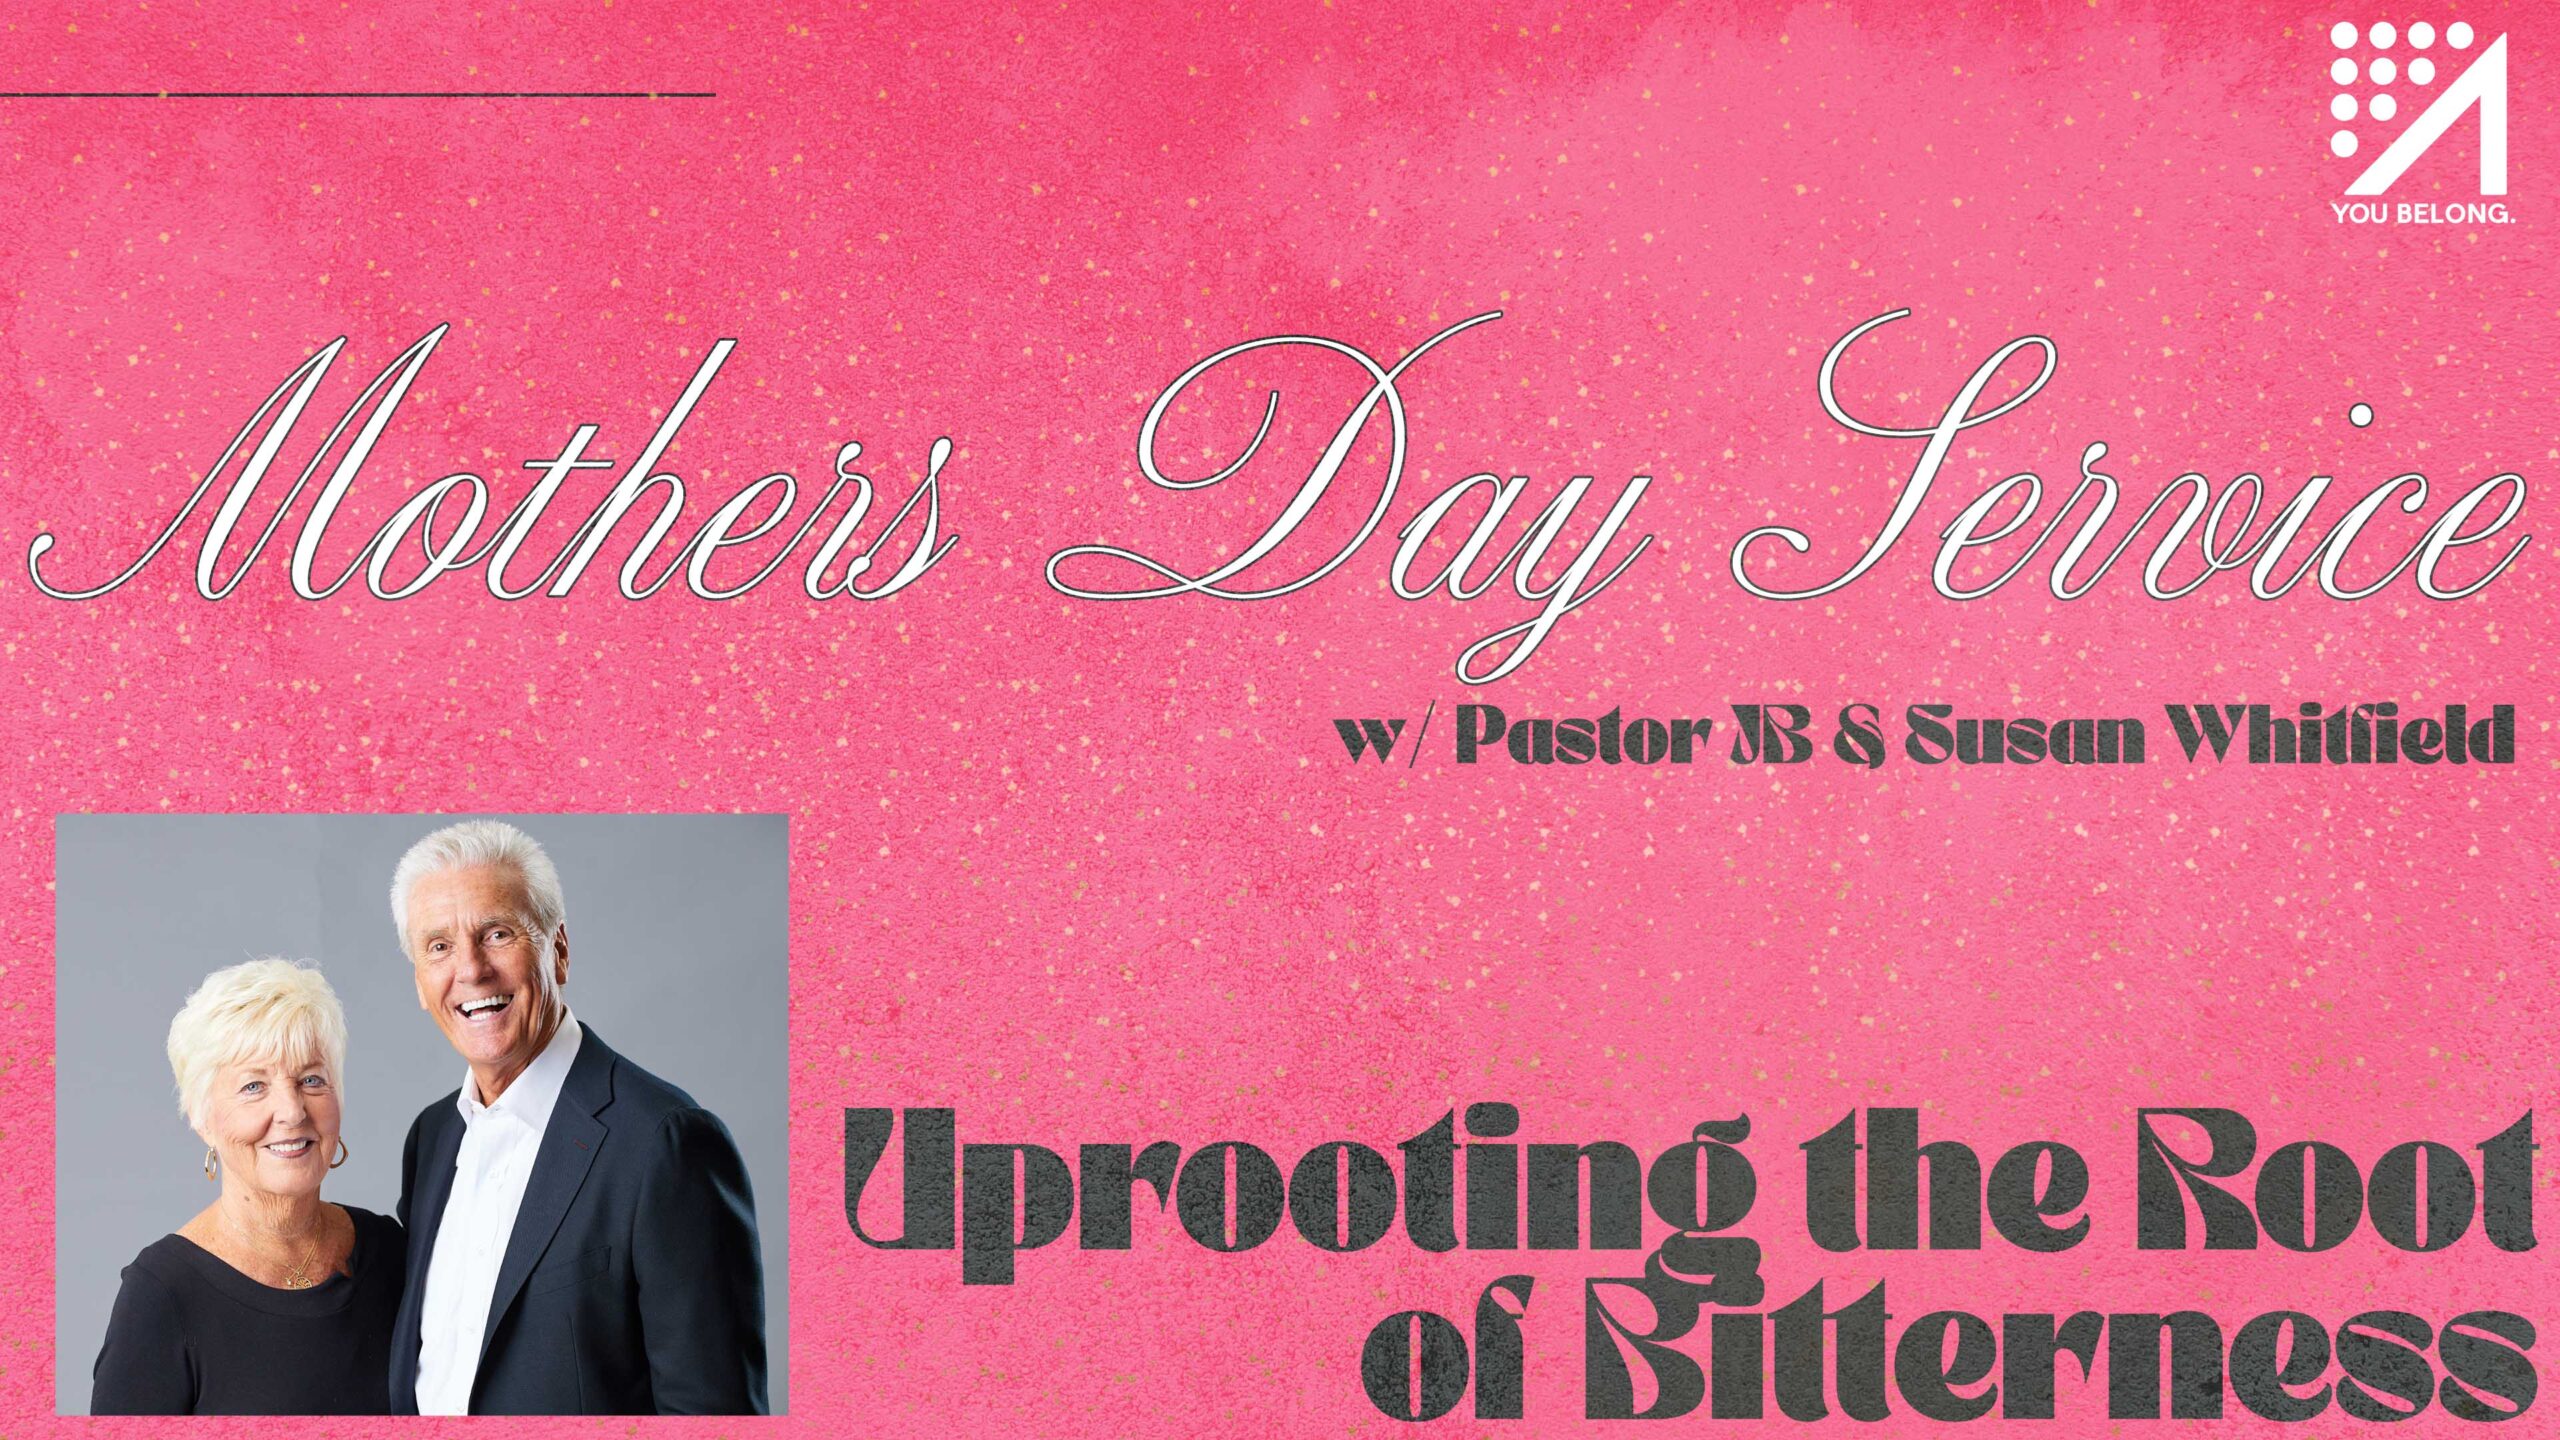 Mothers Day Service | Uprooting the Root of Bitterness | Pastor J.B. & Susan Whitfield